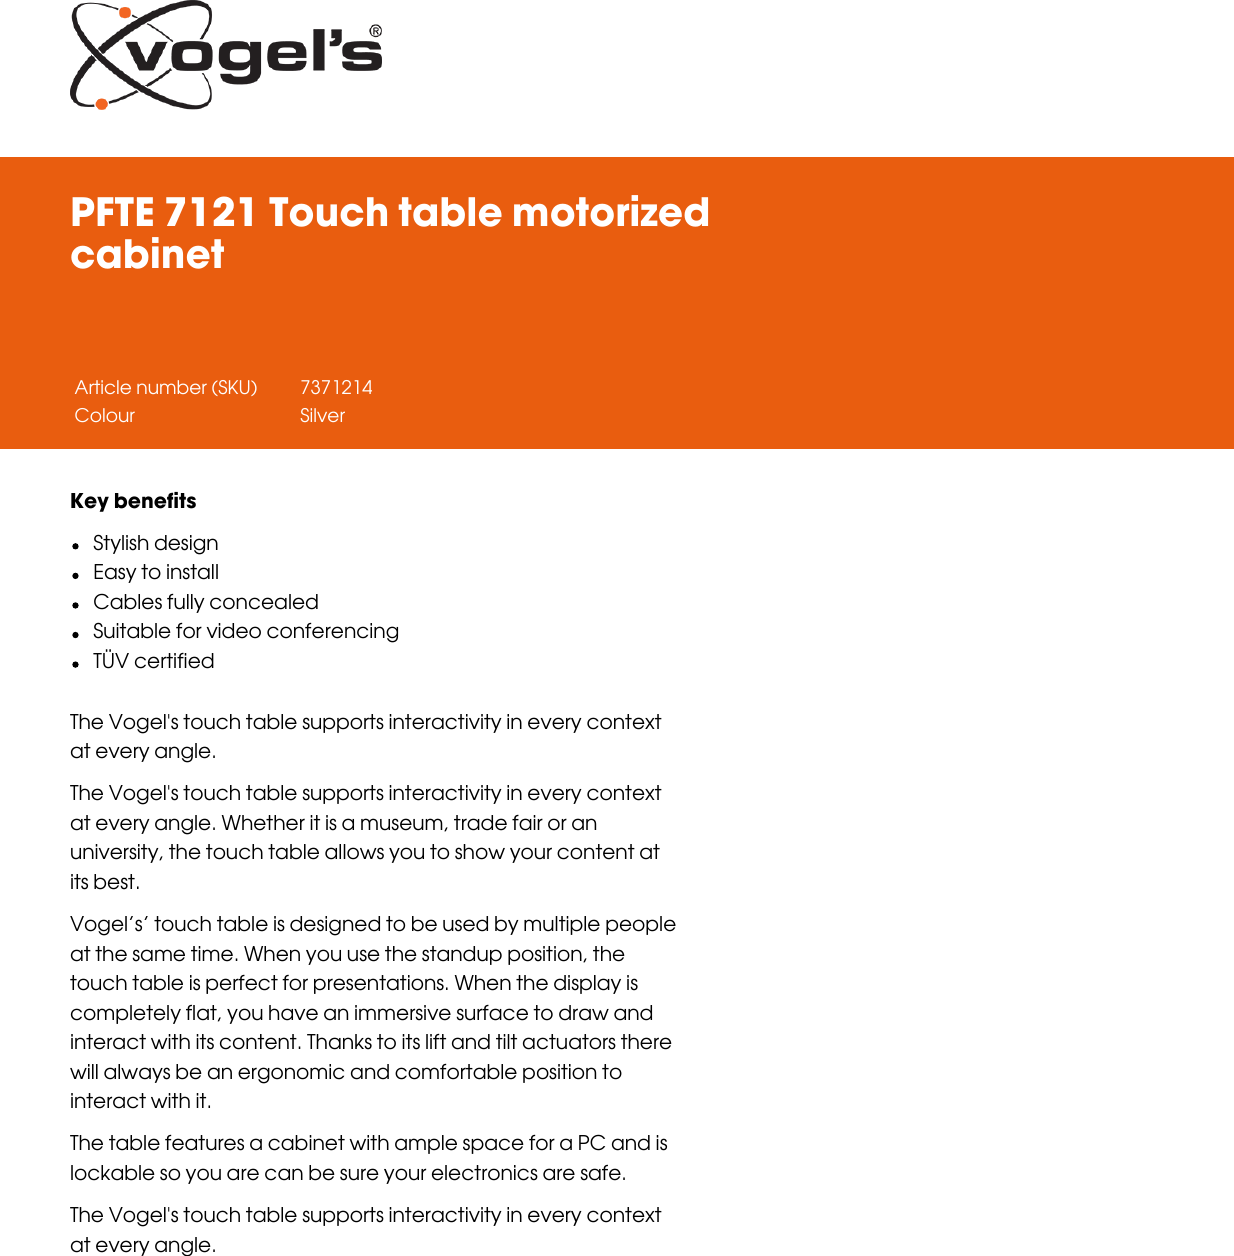 Page 3 of 4 - Leaflet Version 4.0  PFTE-7121-Touch-table-motorized-cabinet-5391-en